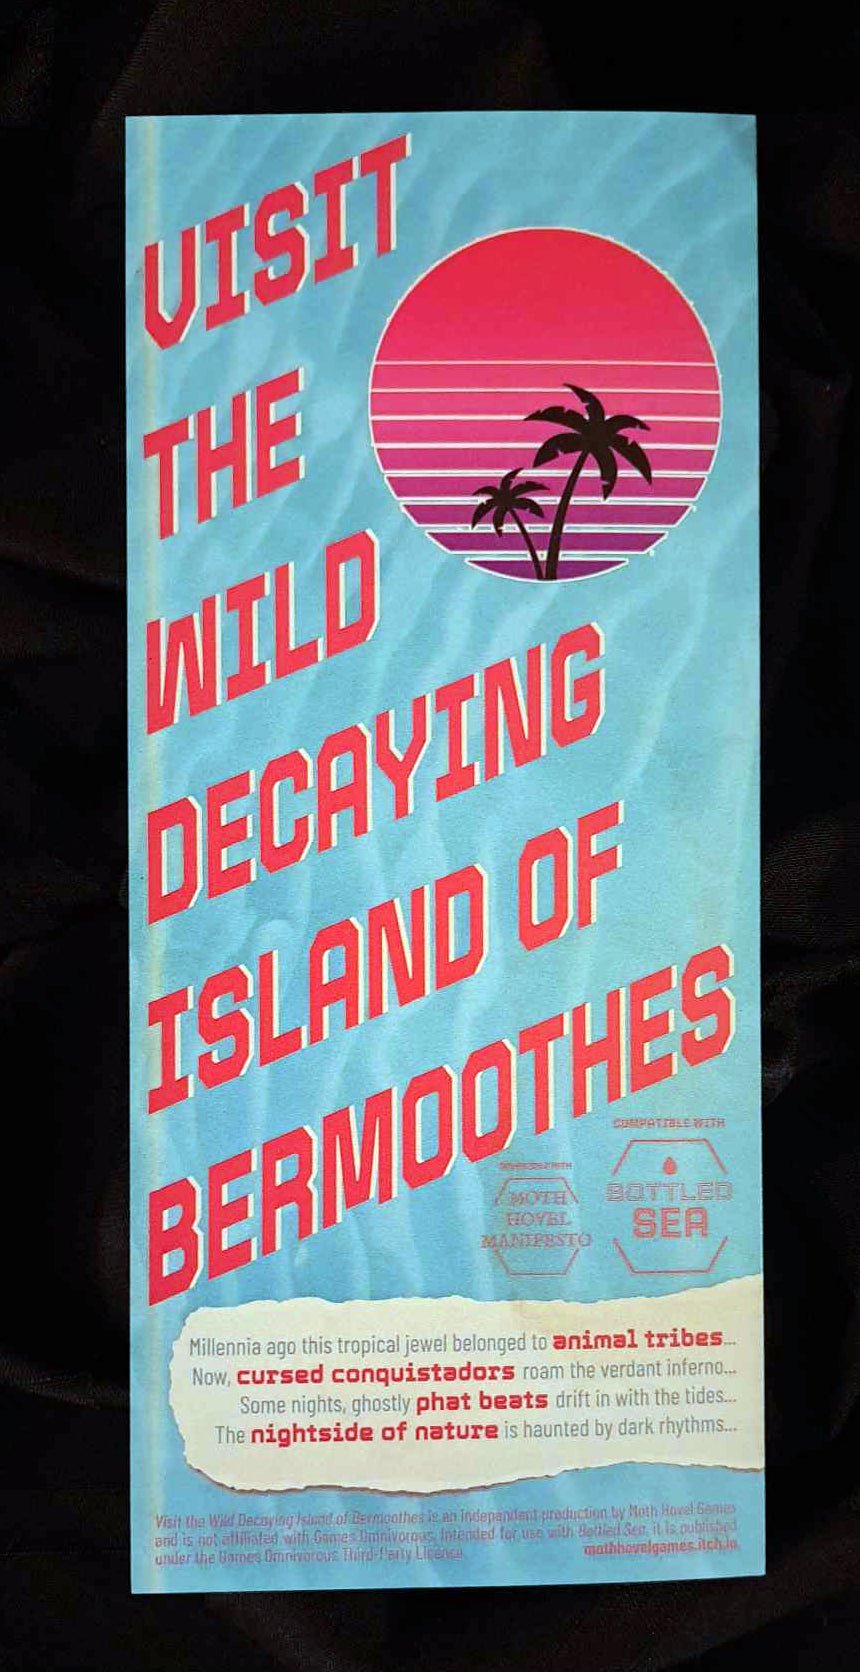 Visit the Wild Decaying Island of Bermoothes + PDF - Exalted Funeral